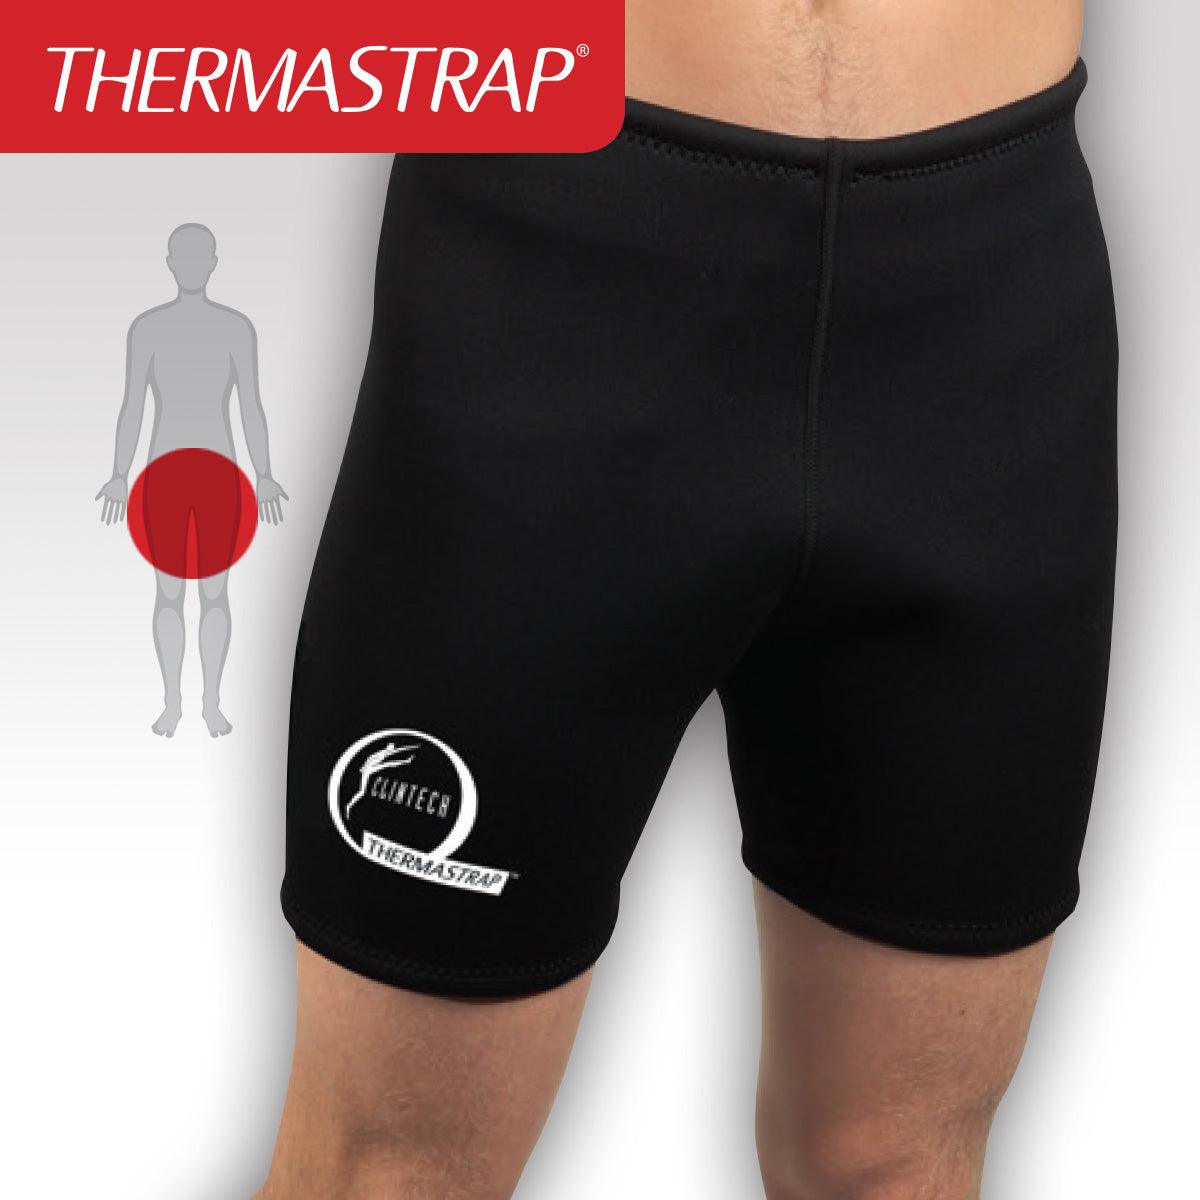 Thermastrap Shorts - Clin-Tech NZ Limited